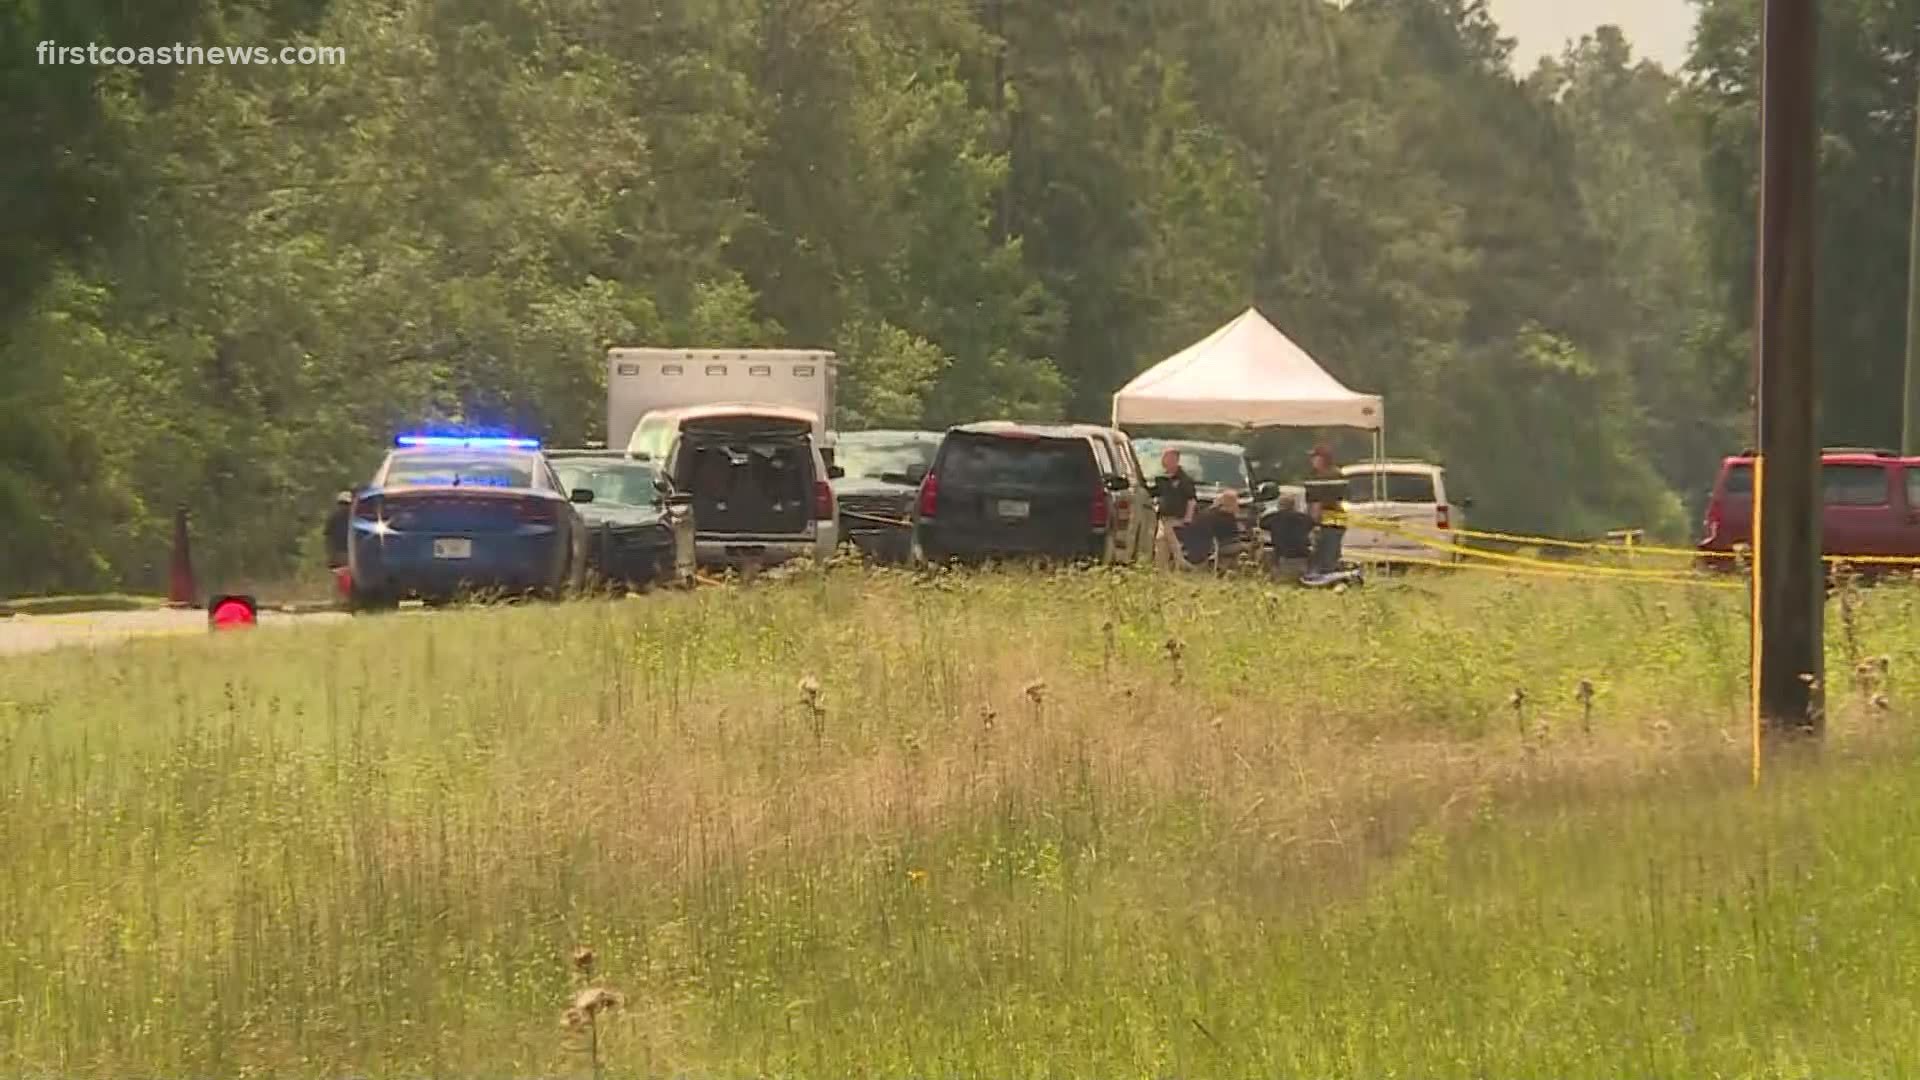 Deputies say they contacted The Georgia Bureau of Investigation to request an independent investigation by their agency.